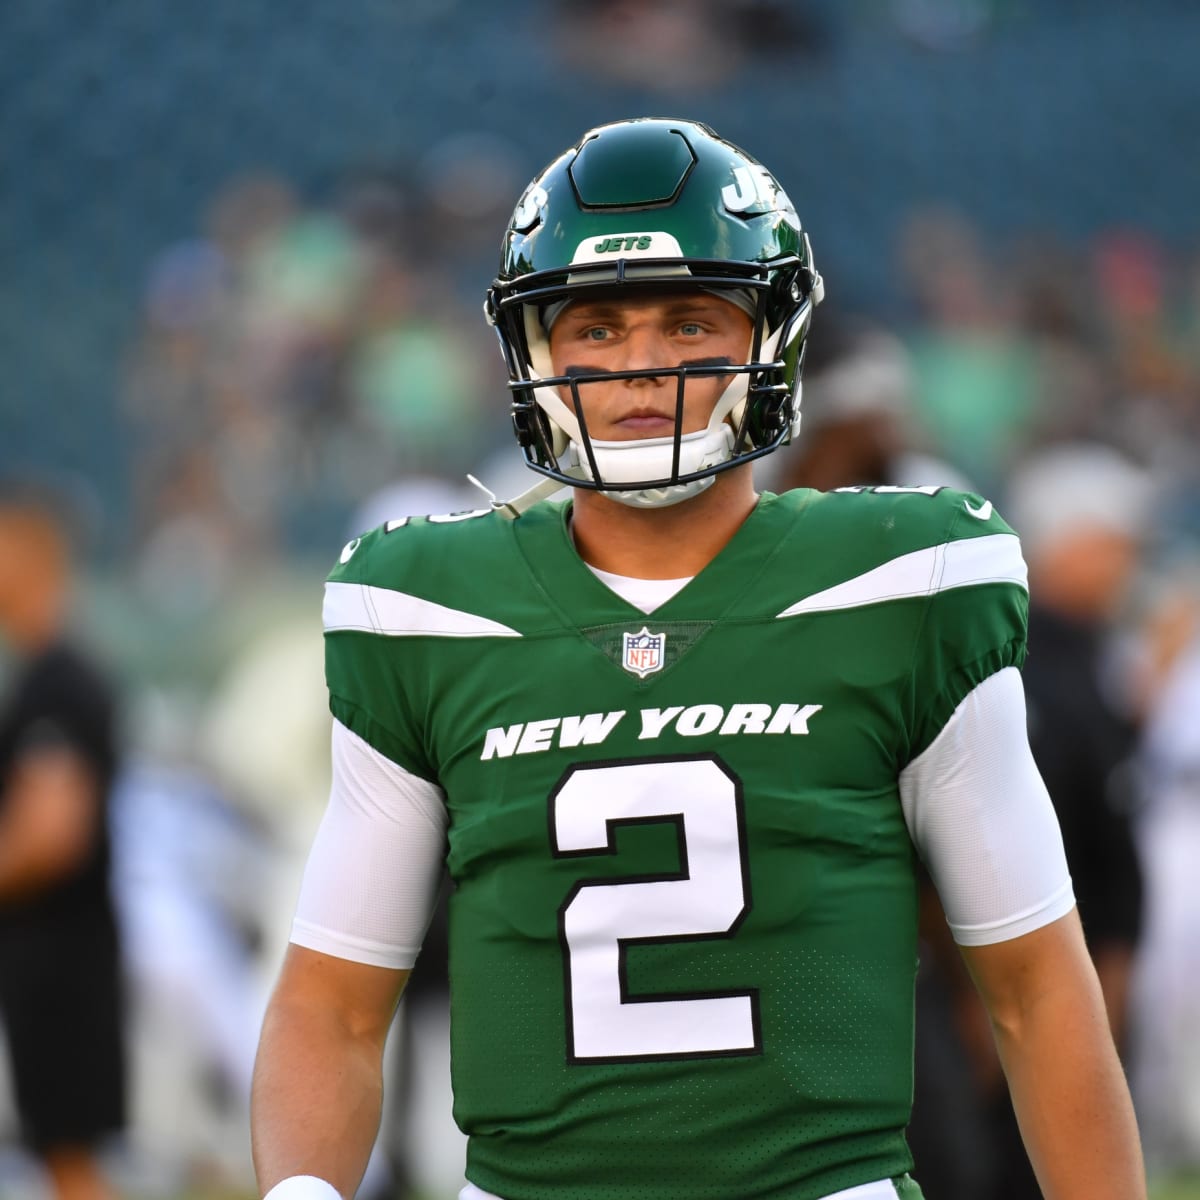 Jets QB Wilson out until at least Week 4, Flacco to start